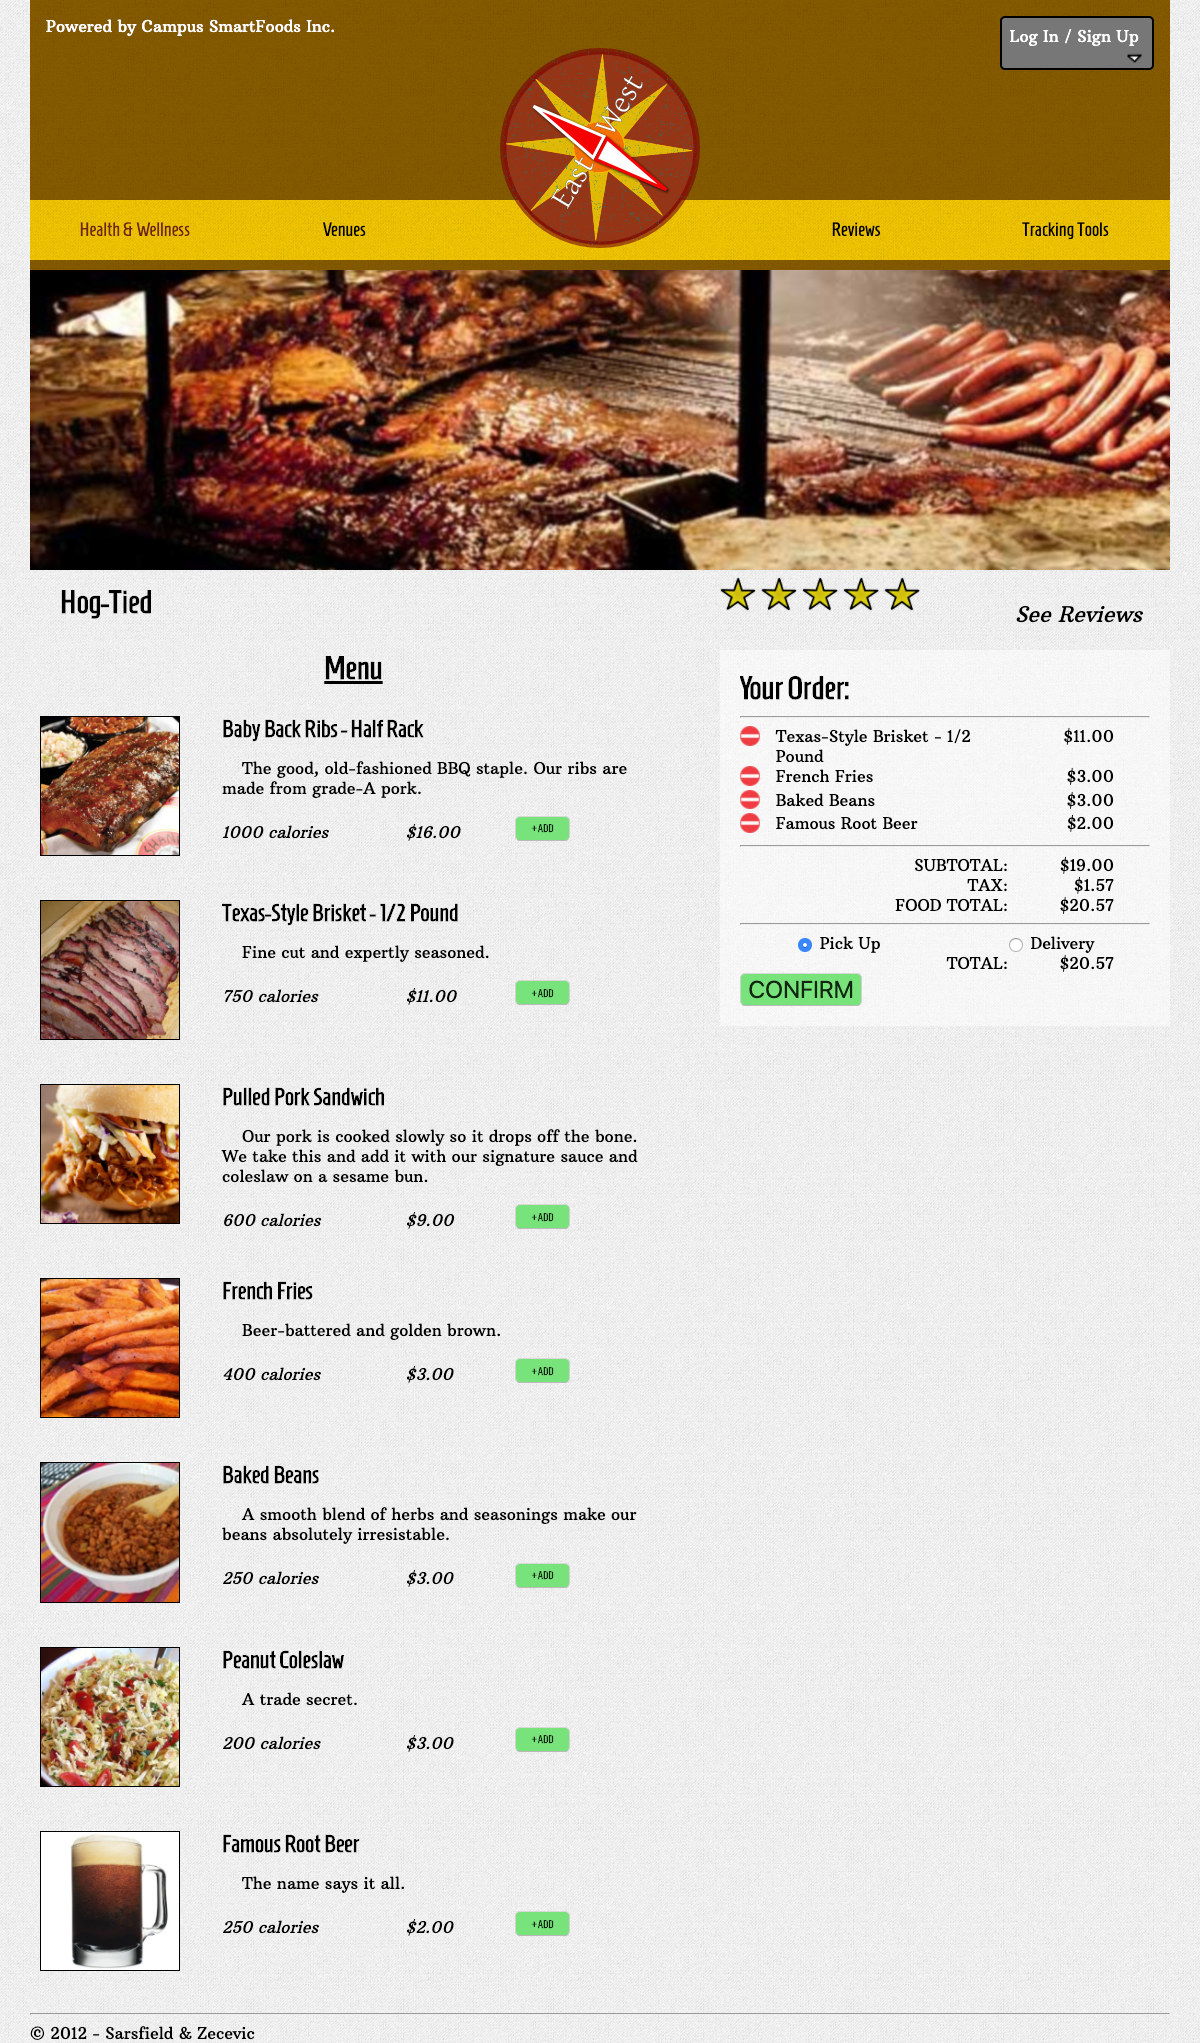 Campus Smart Foods - Order Page